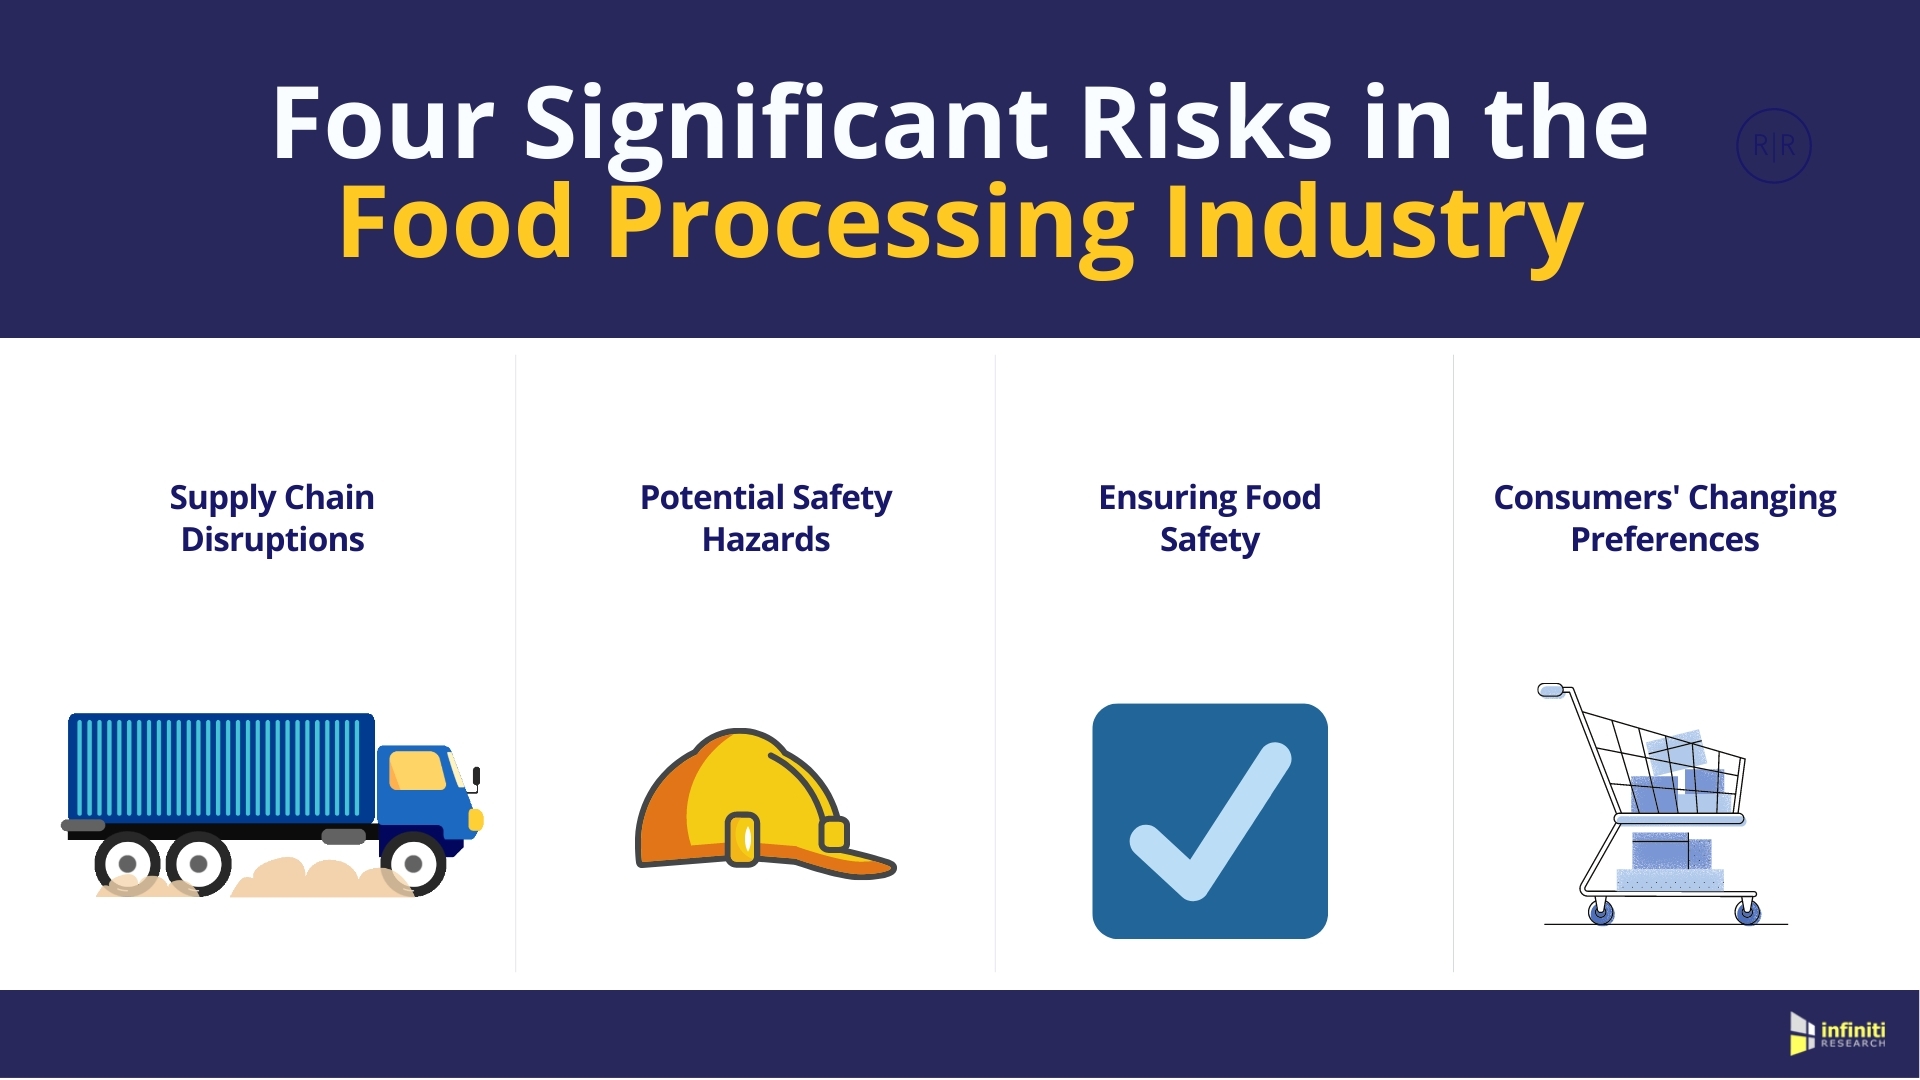 Four Significant Risks Impacting the Food Processing Industry ...